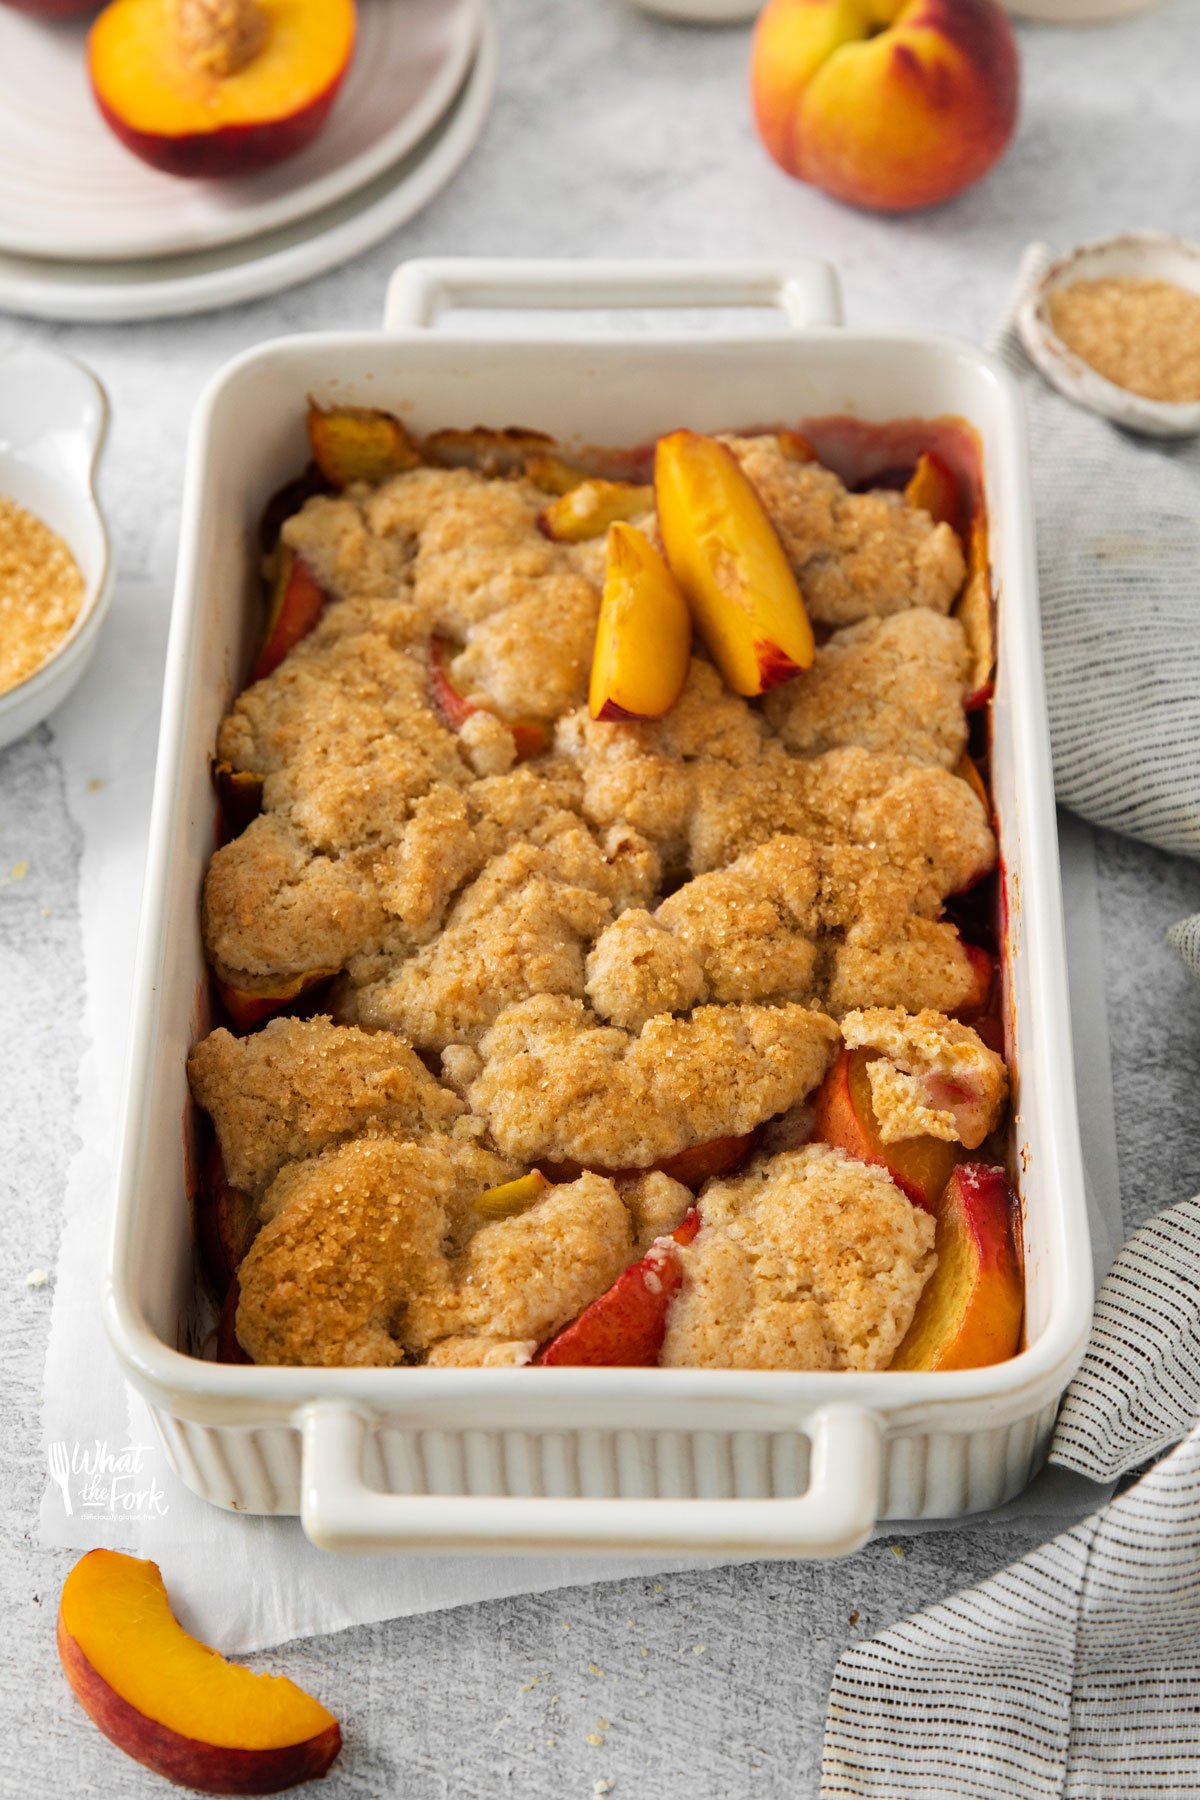 baked gluten free peach cobbler recipe in a white rectangular baking dish with handles on a white surface surrounded by fresh peaches and peach slices